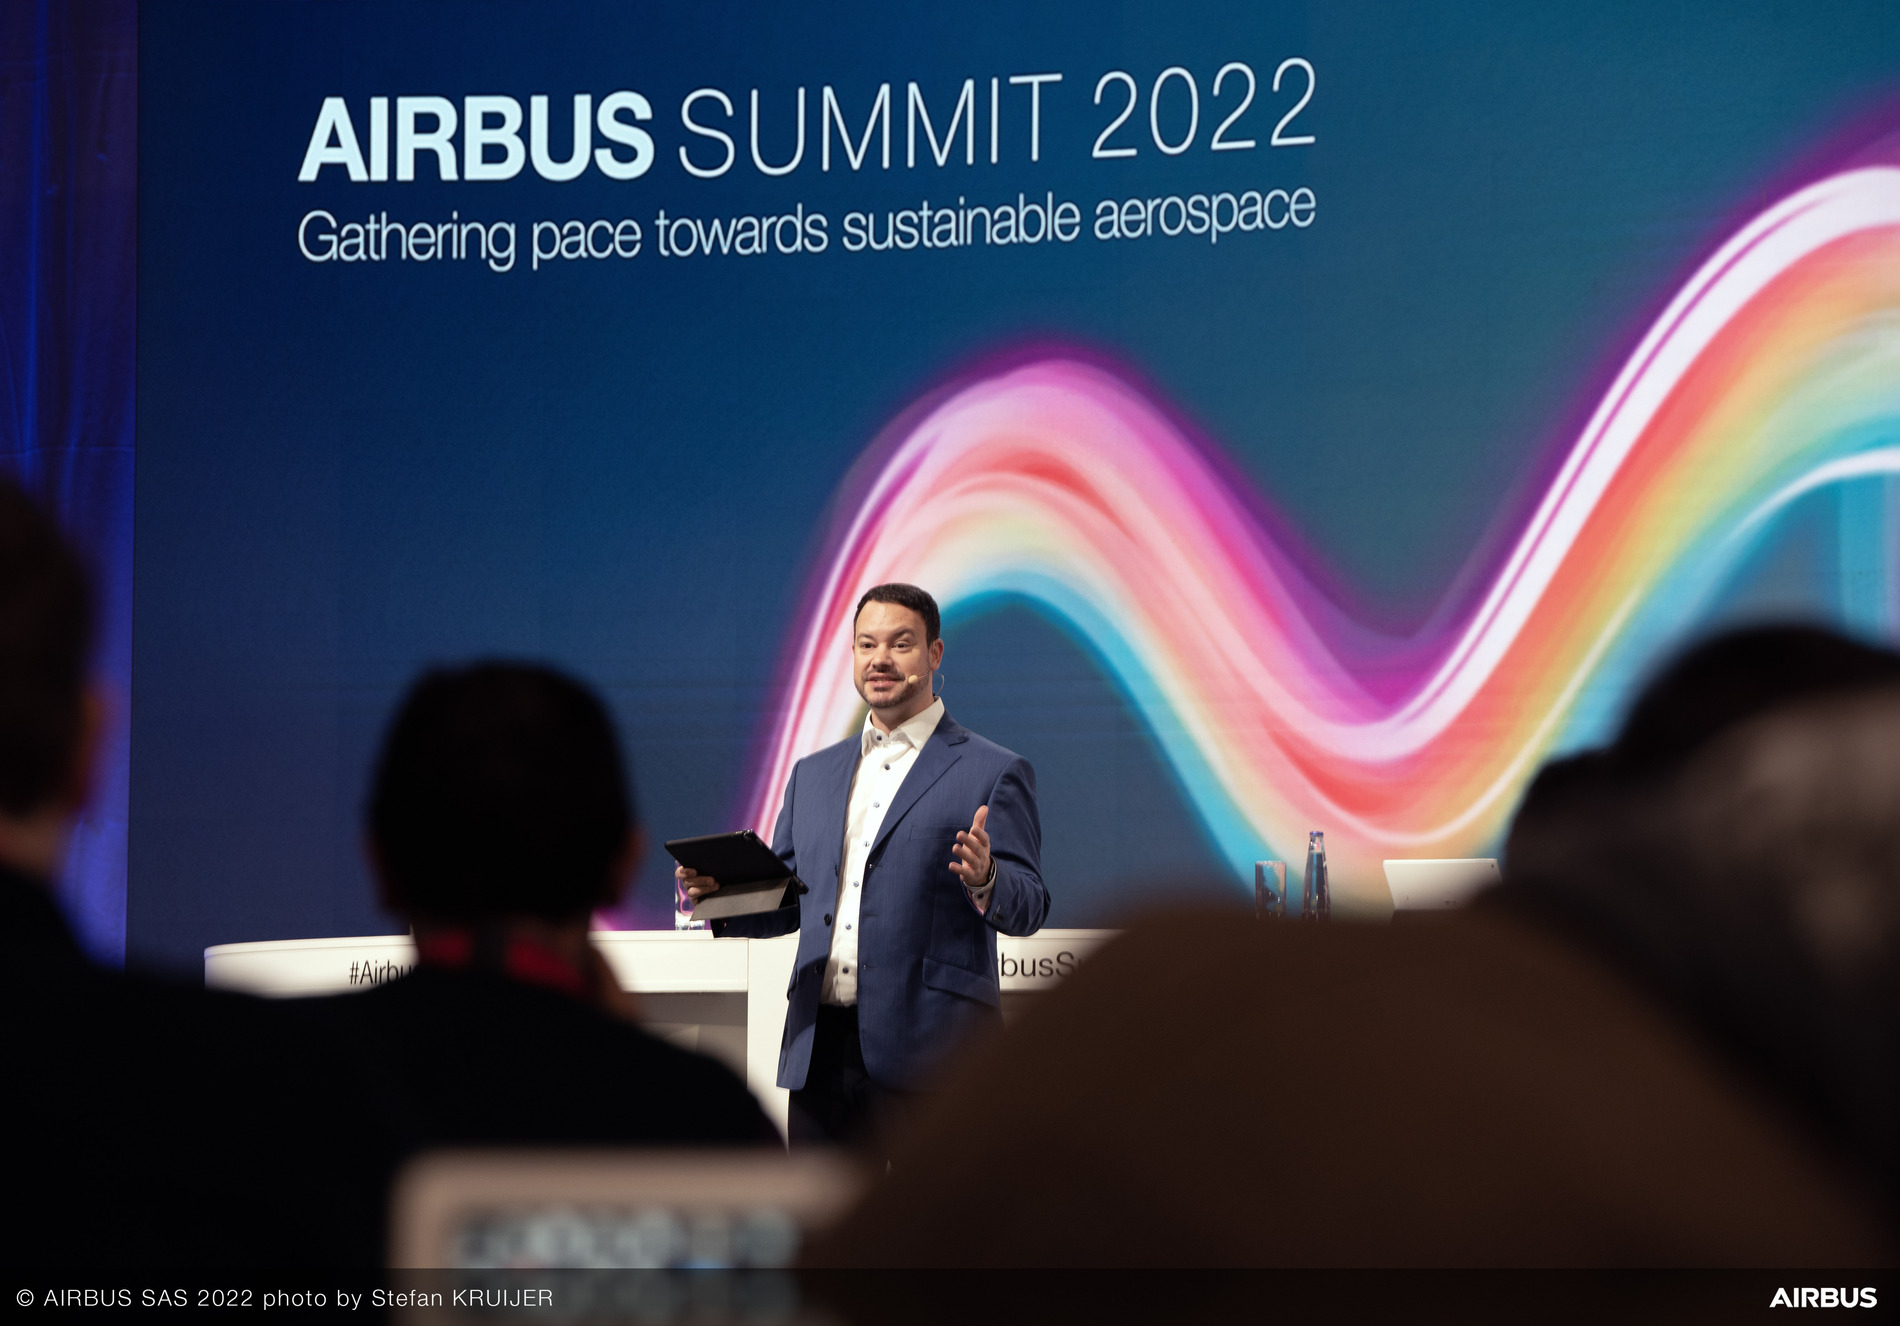 Airbus continues to advance in its decarbonization goals